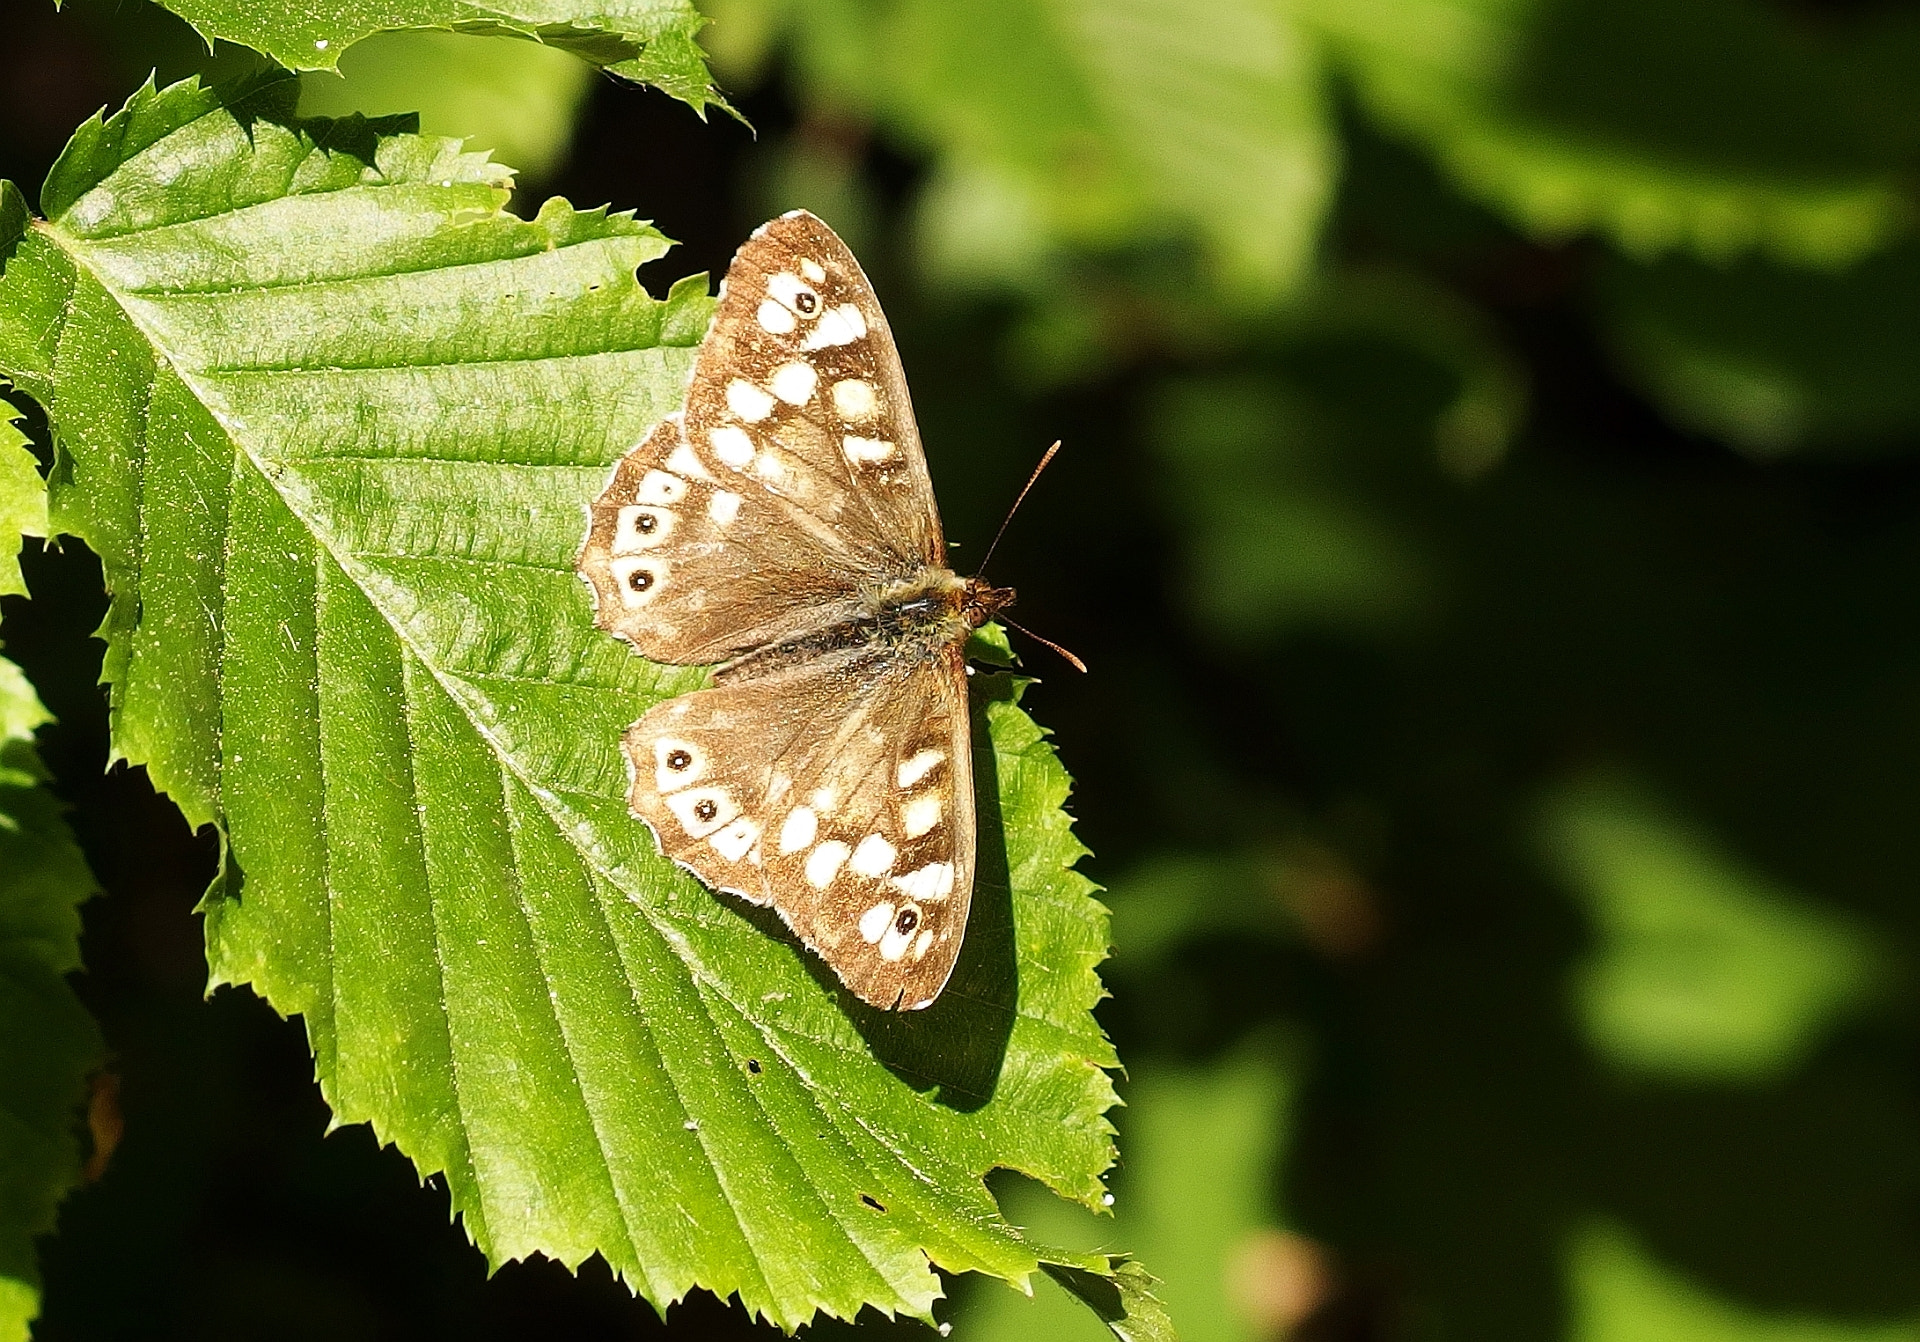 Olympus XZ-2 iHS sample photo. Speckled wood photography